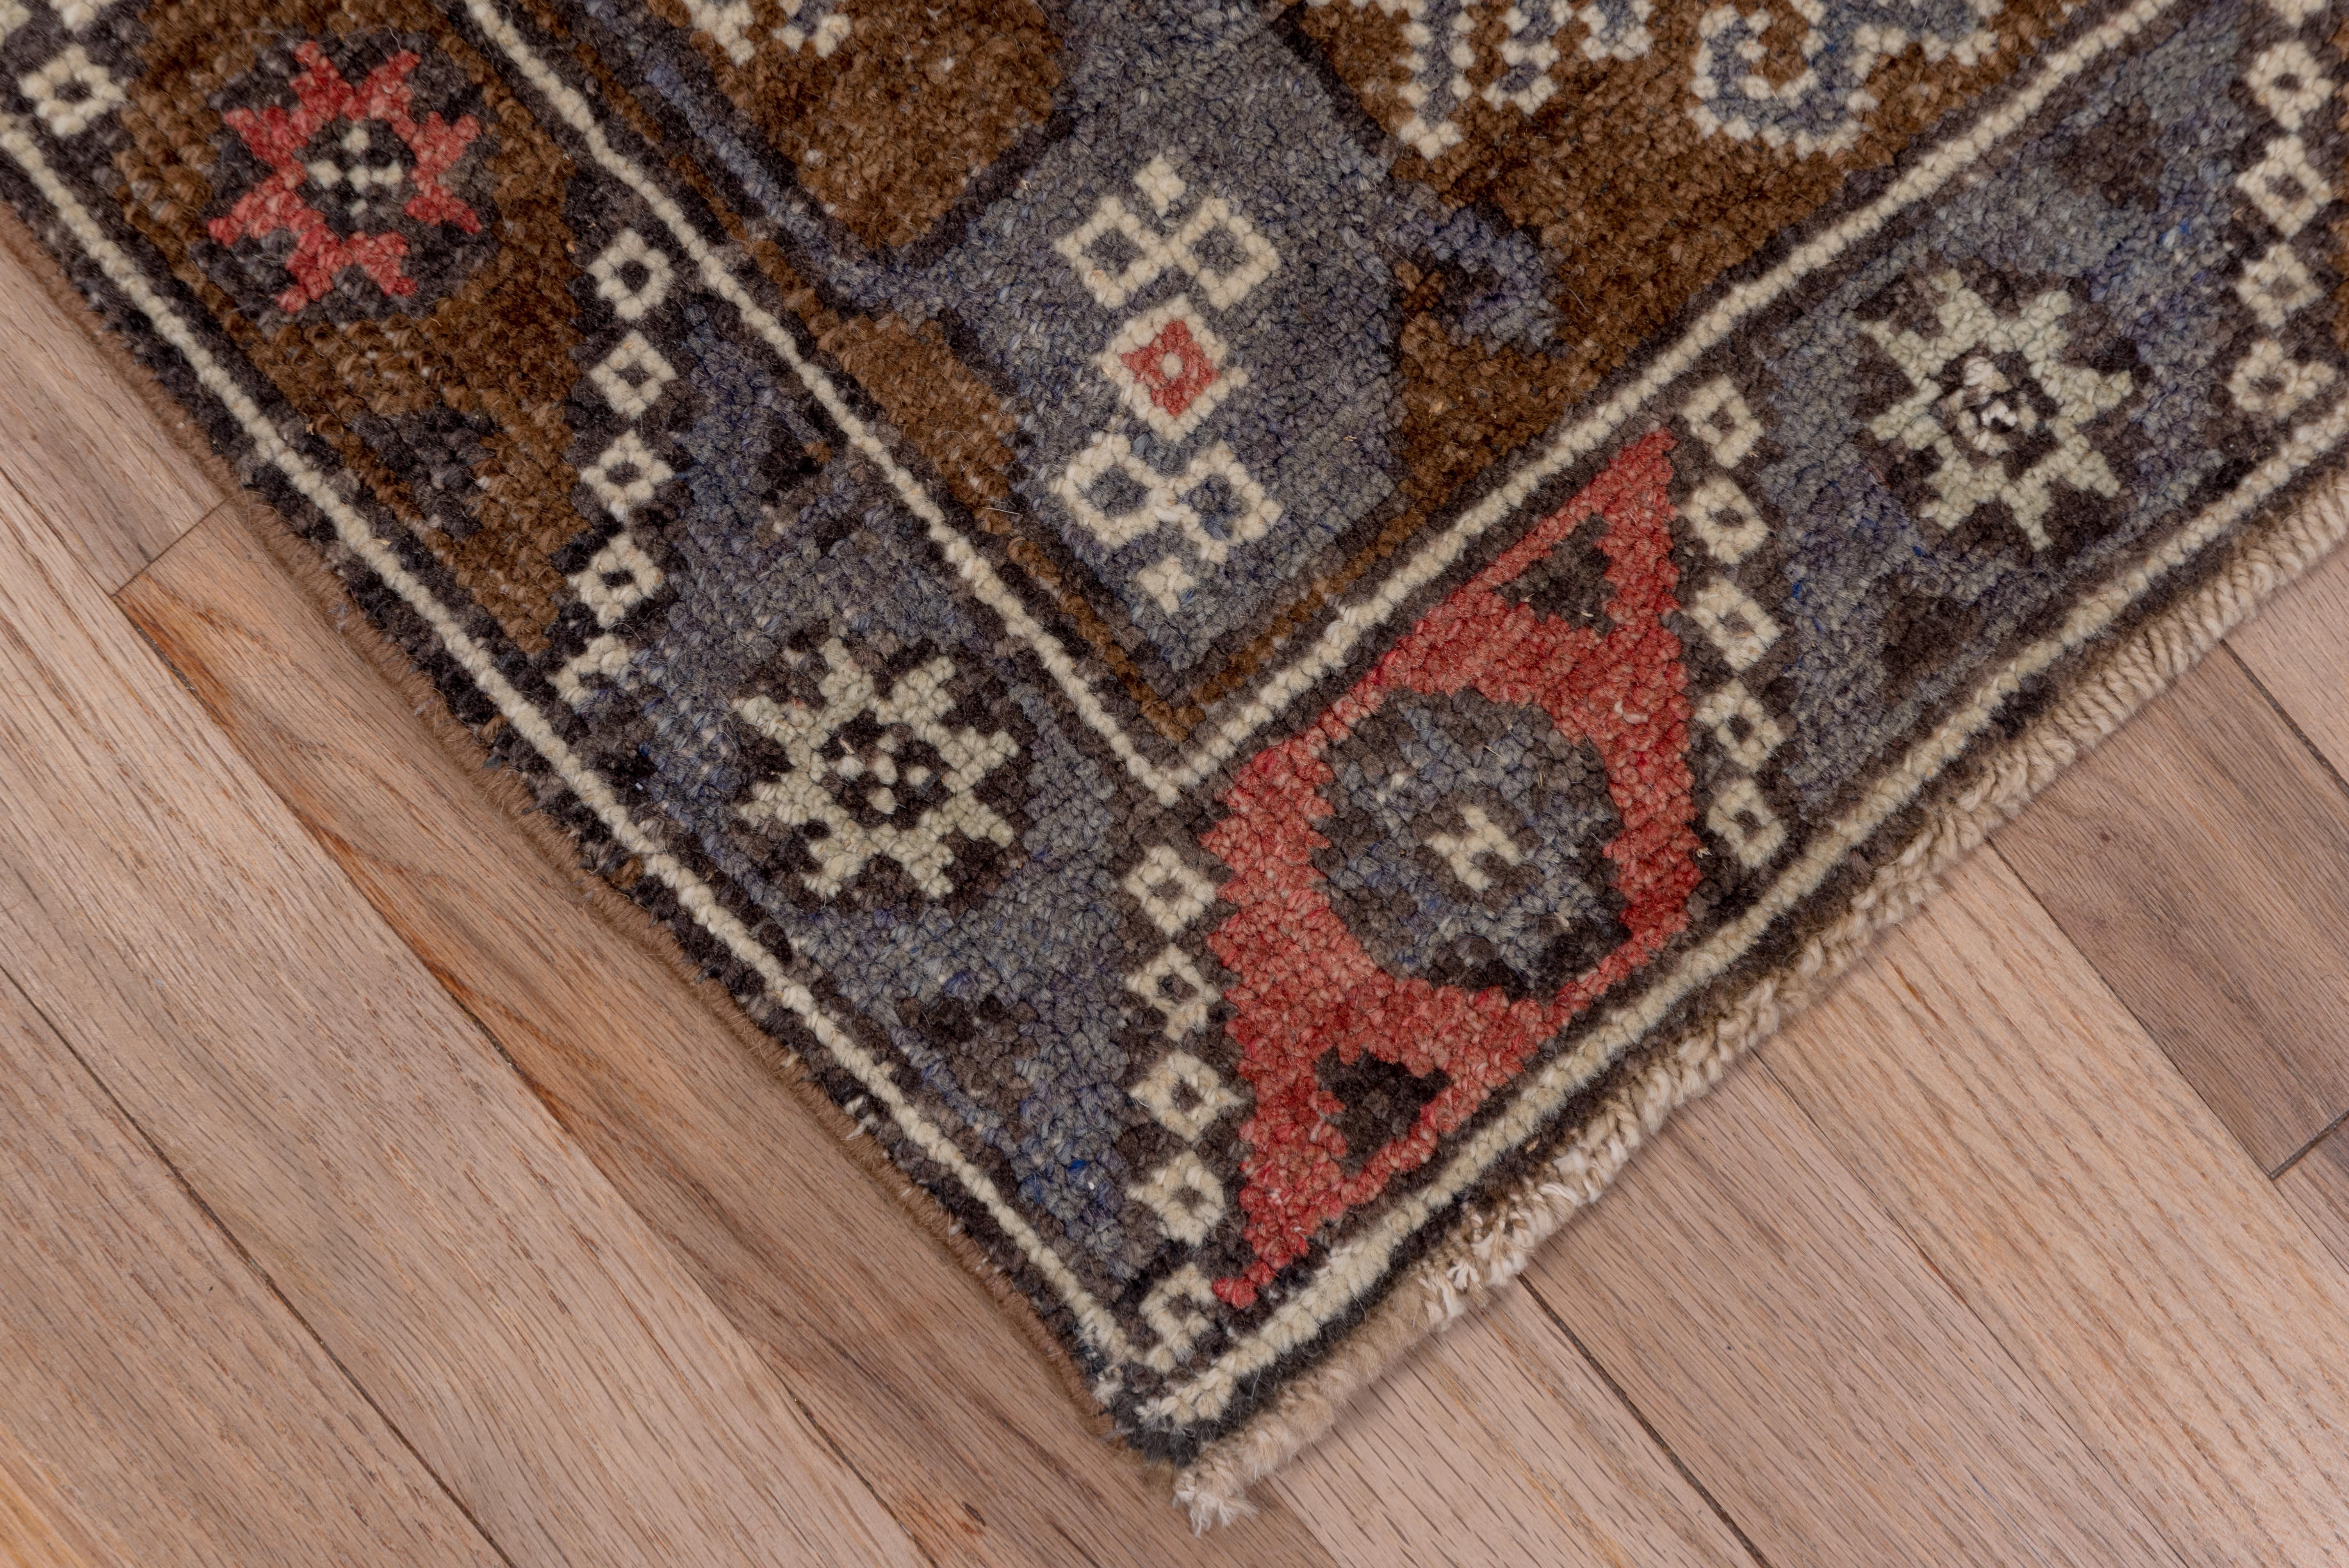 Antique Turkish Konya Rug 1950s In Good Condition For Sale In New York, NY